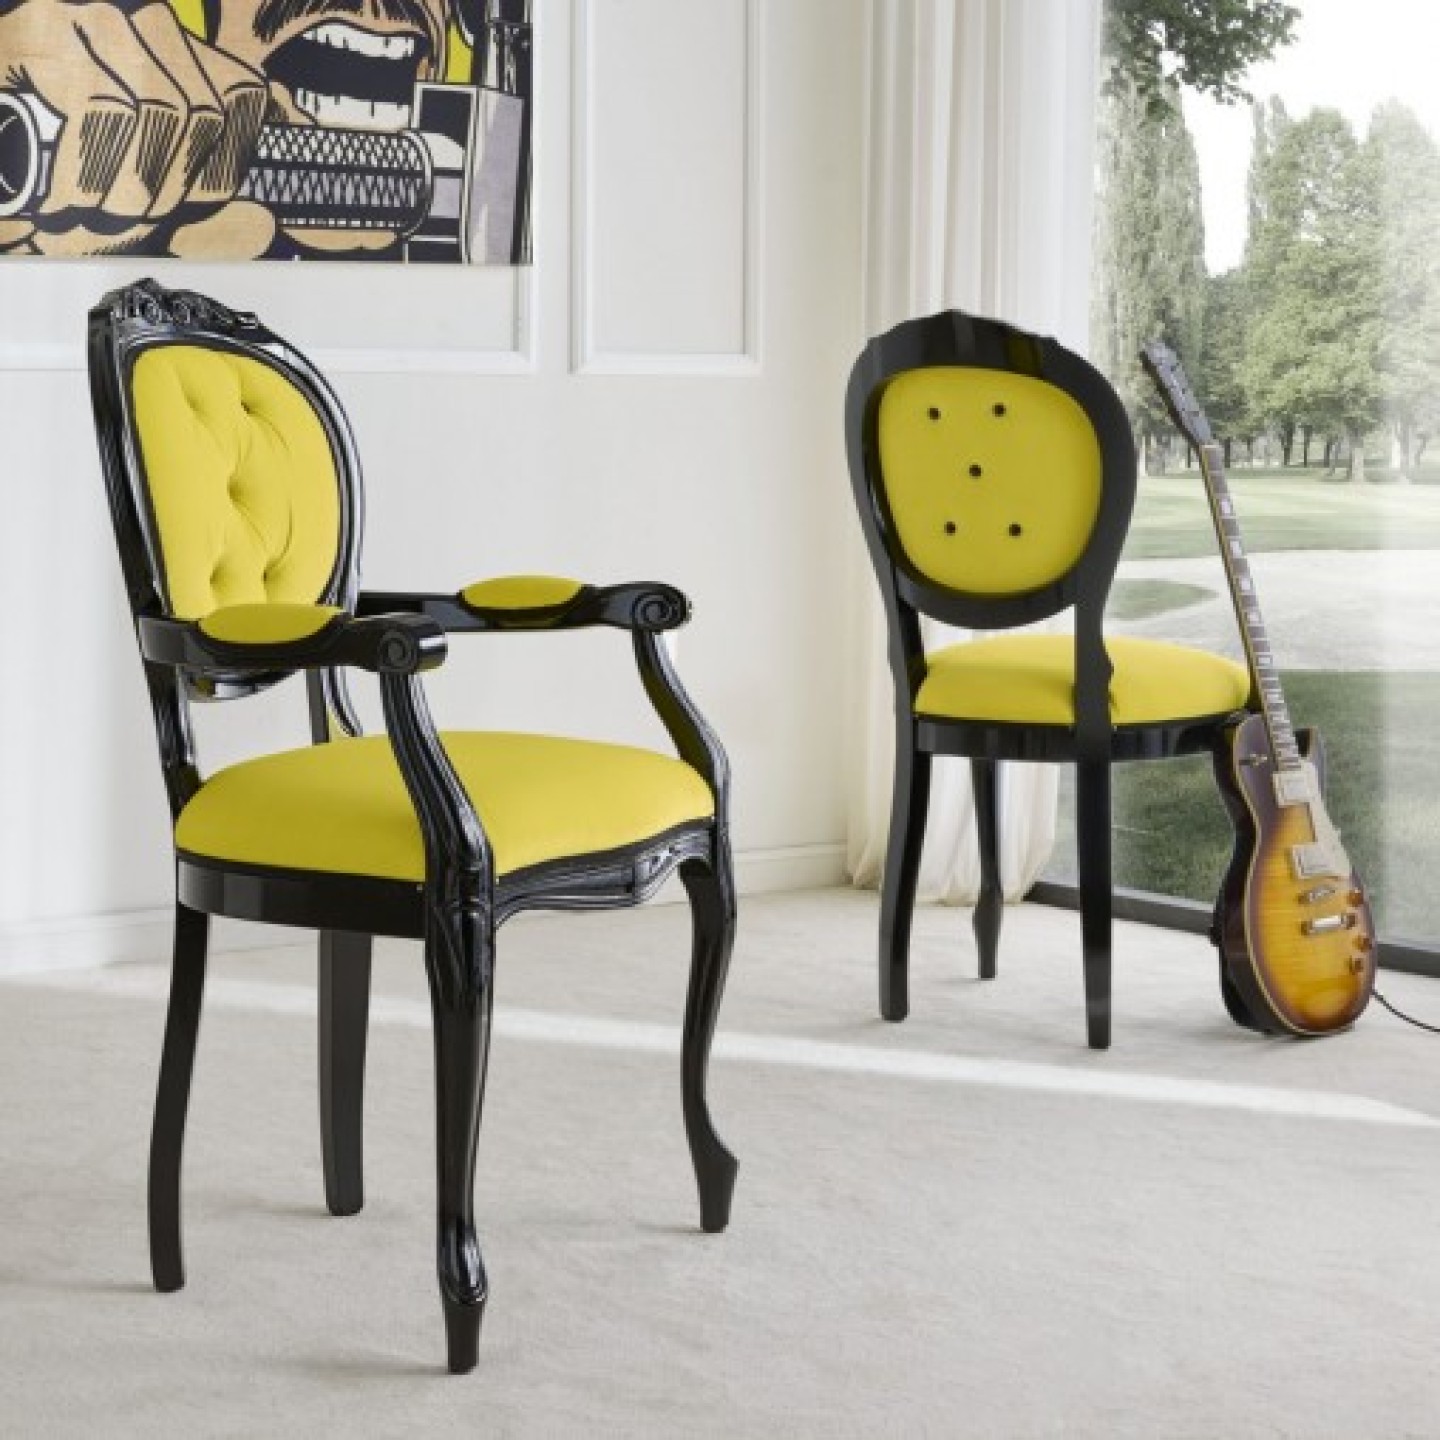 THE QUEEN CLASSIC DINNING CHAIR